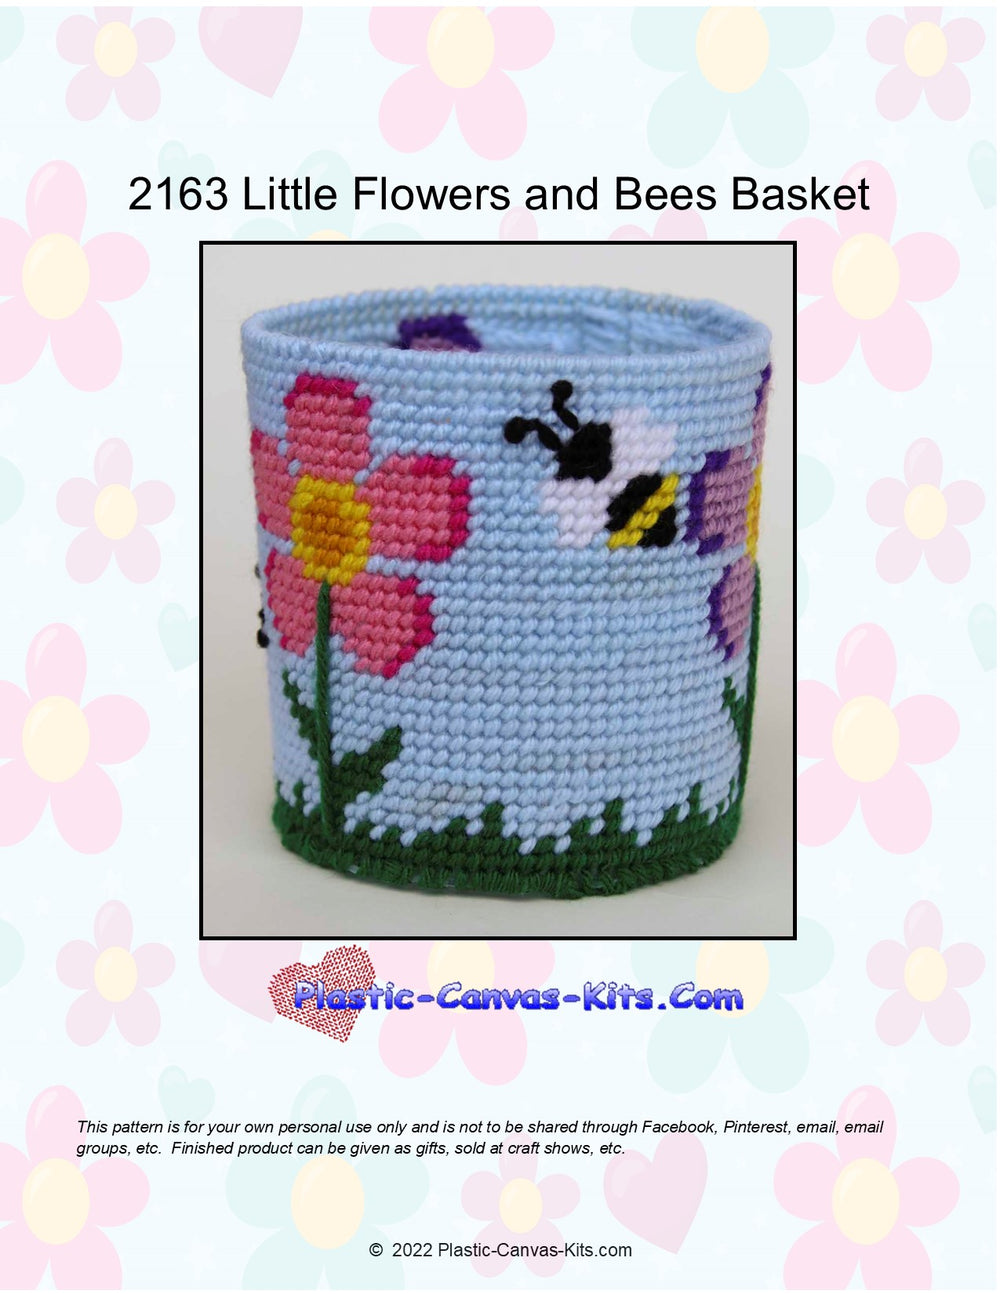 Little Flowers and Bees Basket